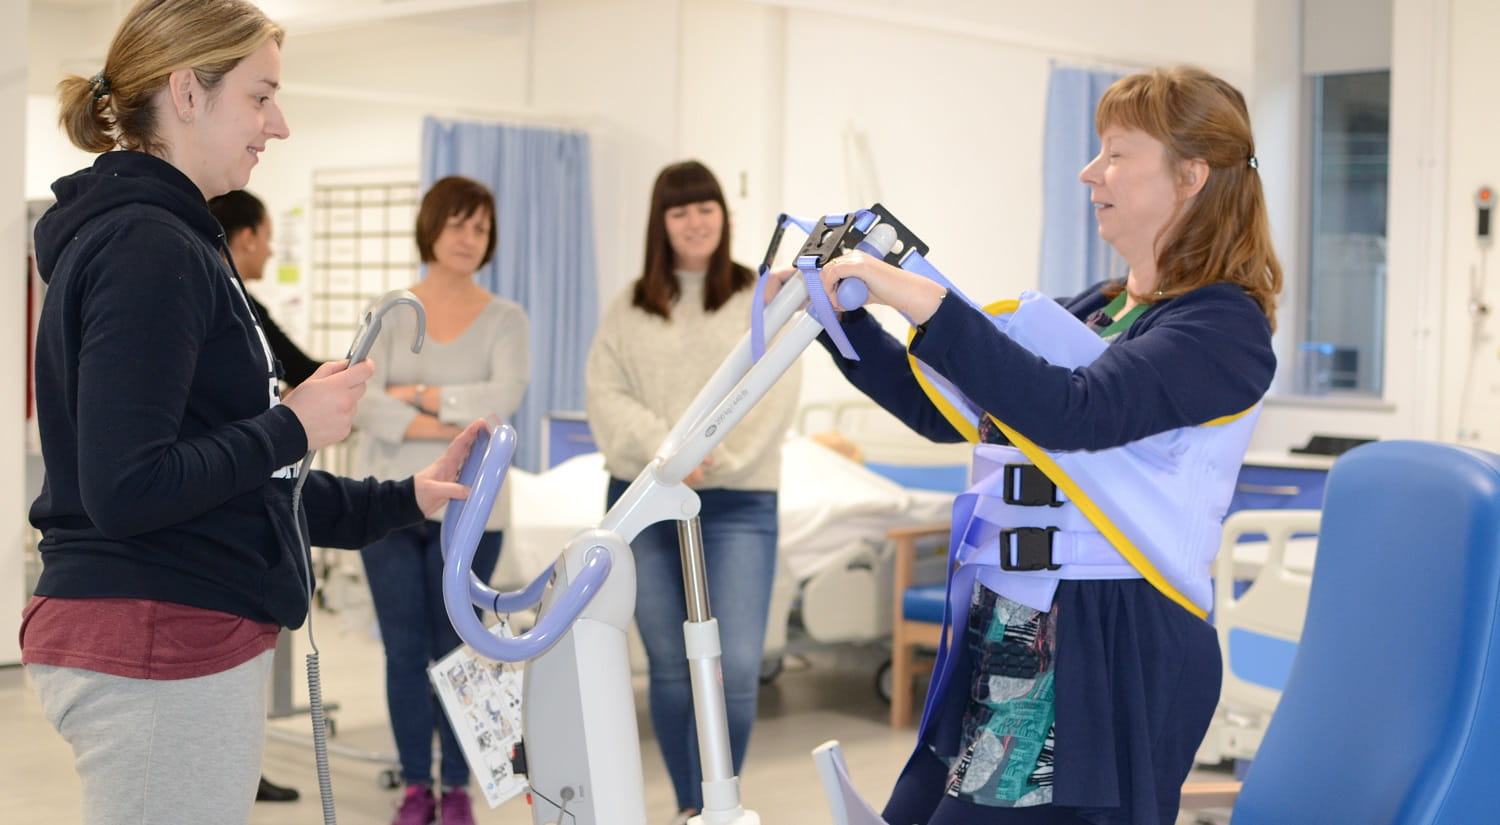 Erika Kerry from the School of Health and Social Care is standing on the left holding the control for an electronic hoist in her right hand. A mock-patient is on the right, with the hoist straps around her waist and under her arms. She is being lowered in to a blue chair. Two prospective students are standing in the background watching.